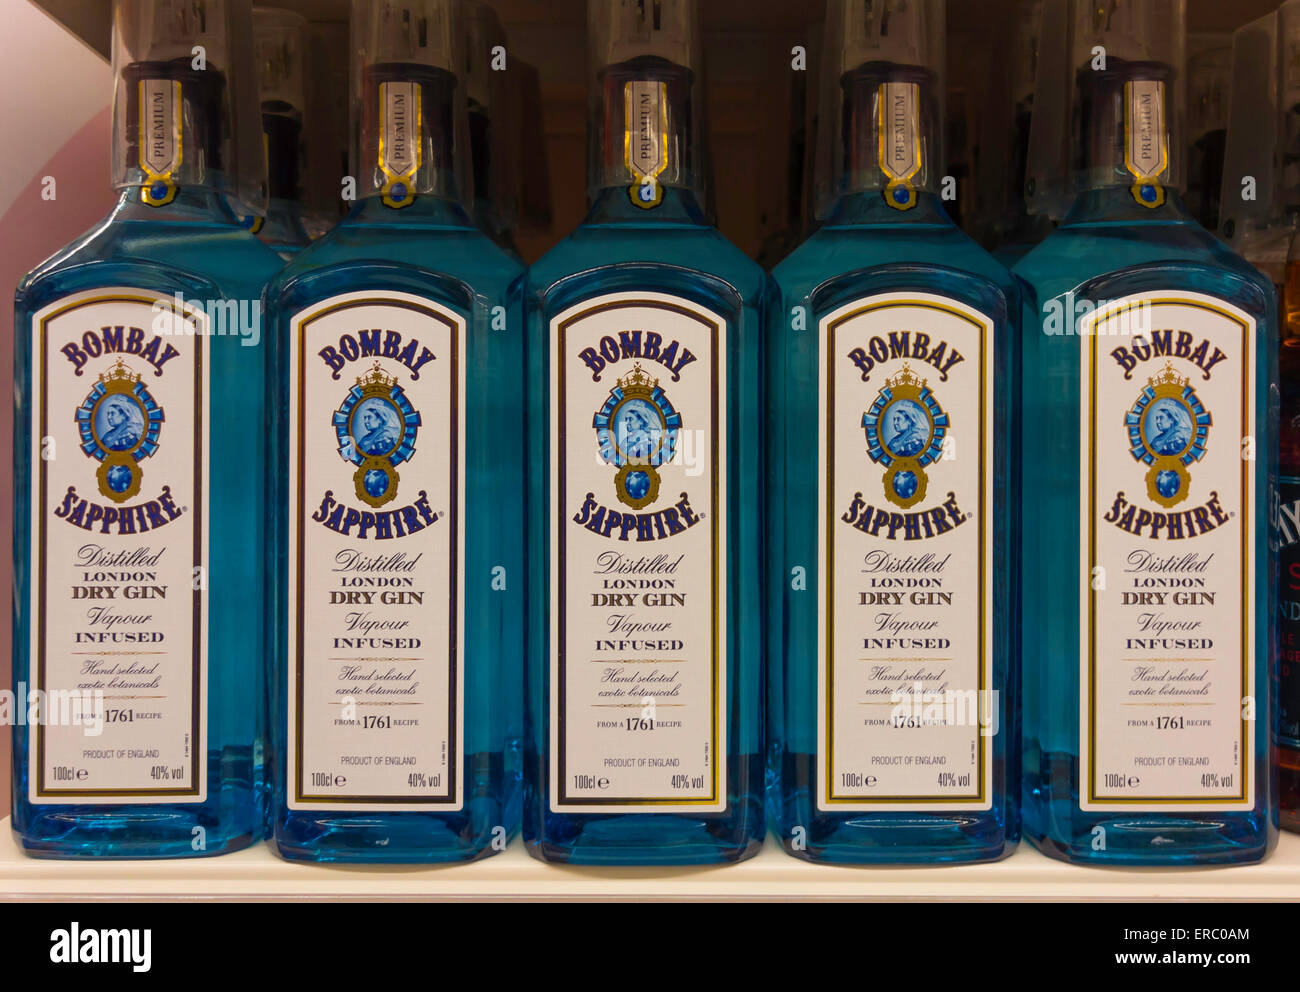 A supermarket display of bottles of Bombay Sapphire Blue London Gin Stock Photo